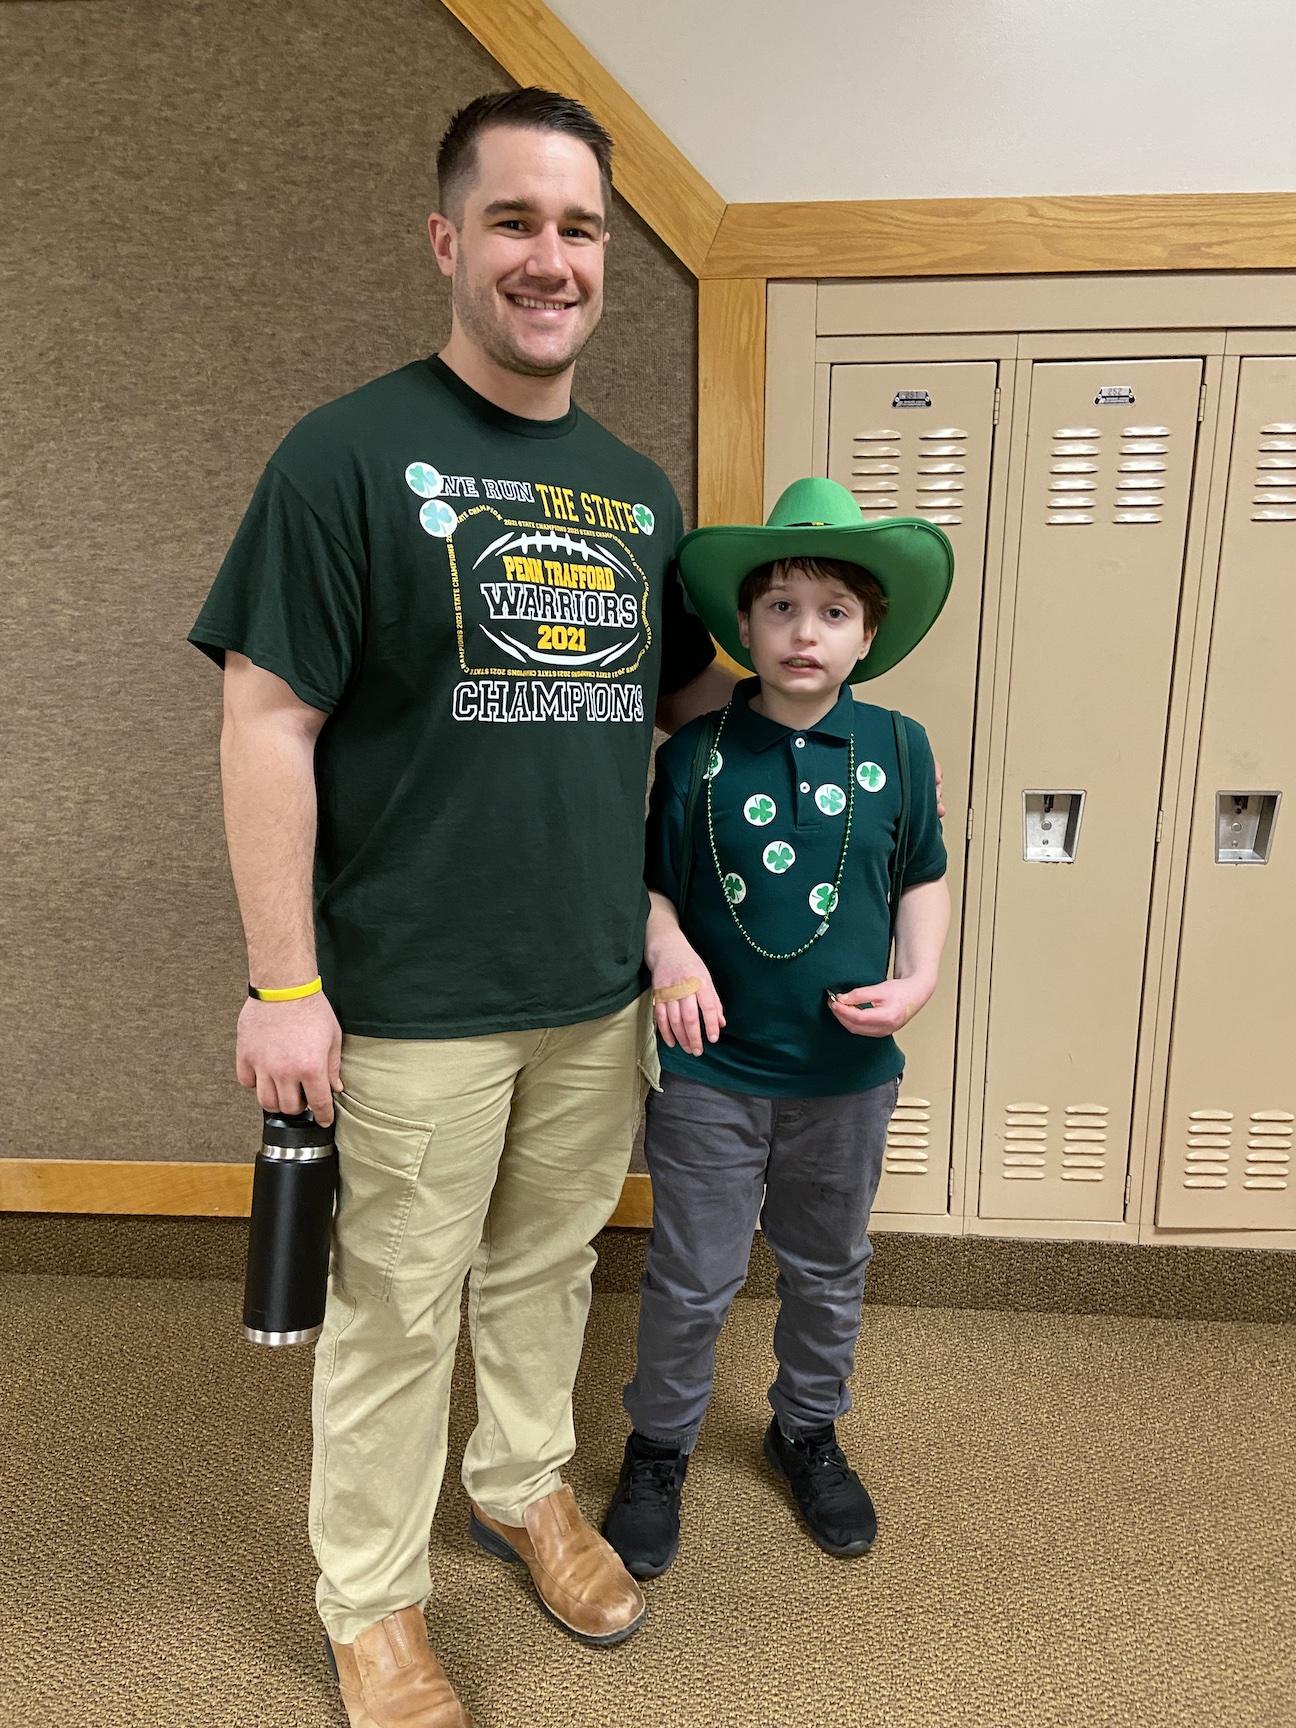 Mr. Guzik and Alexander Furko handed out compliments (and shamrock stickers) on St. Patrick's Day